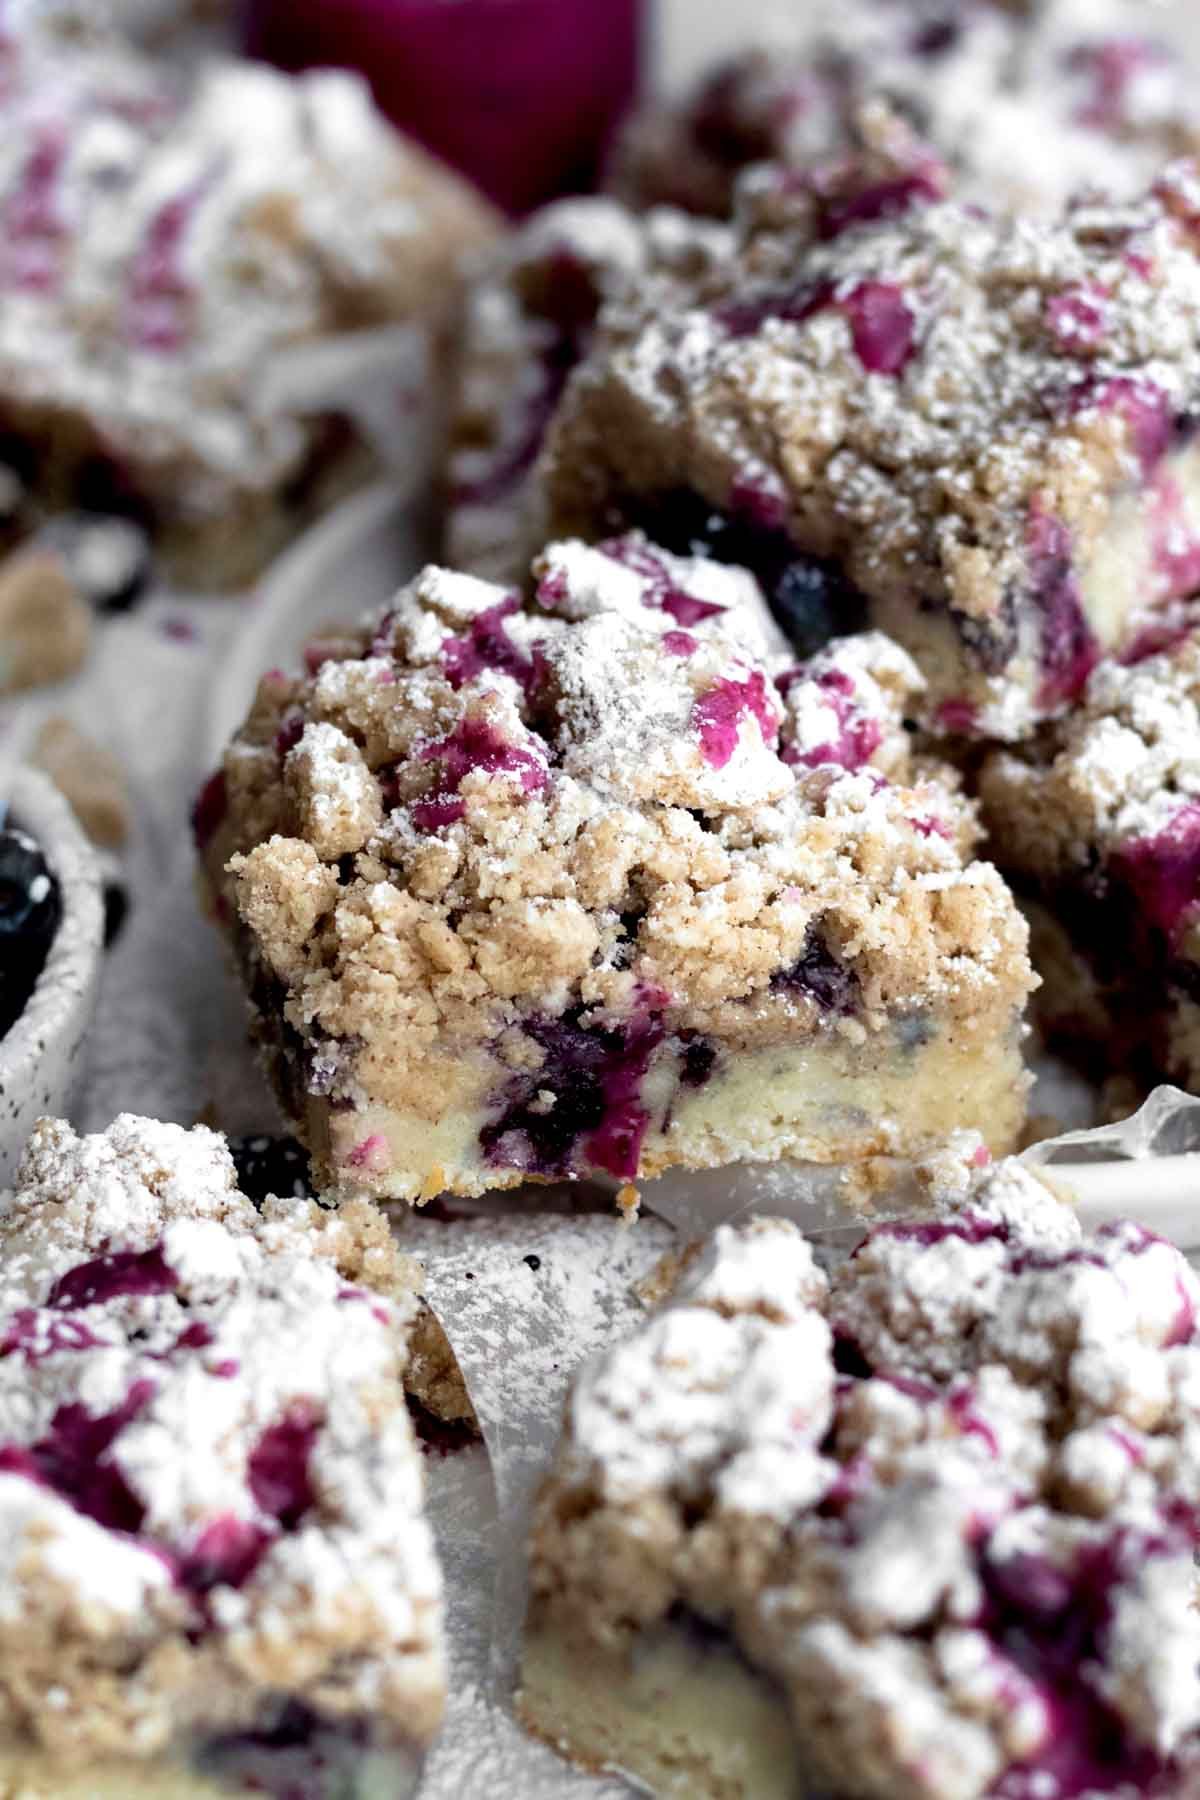 A 45 degree angle of gluten free Blueberry Crumb Cakes.